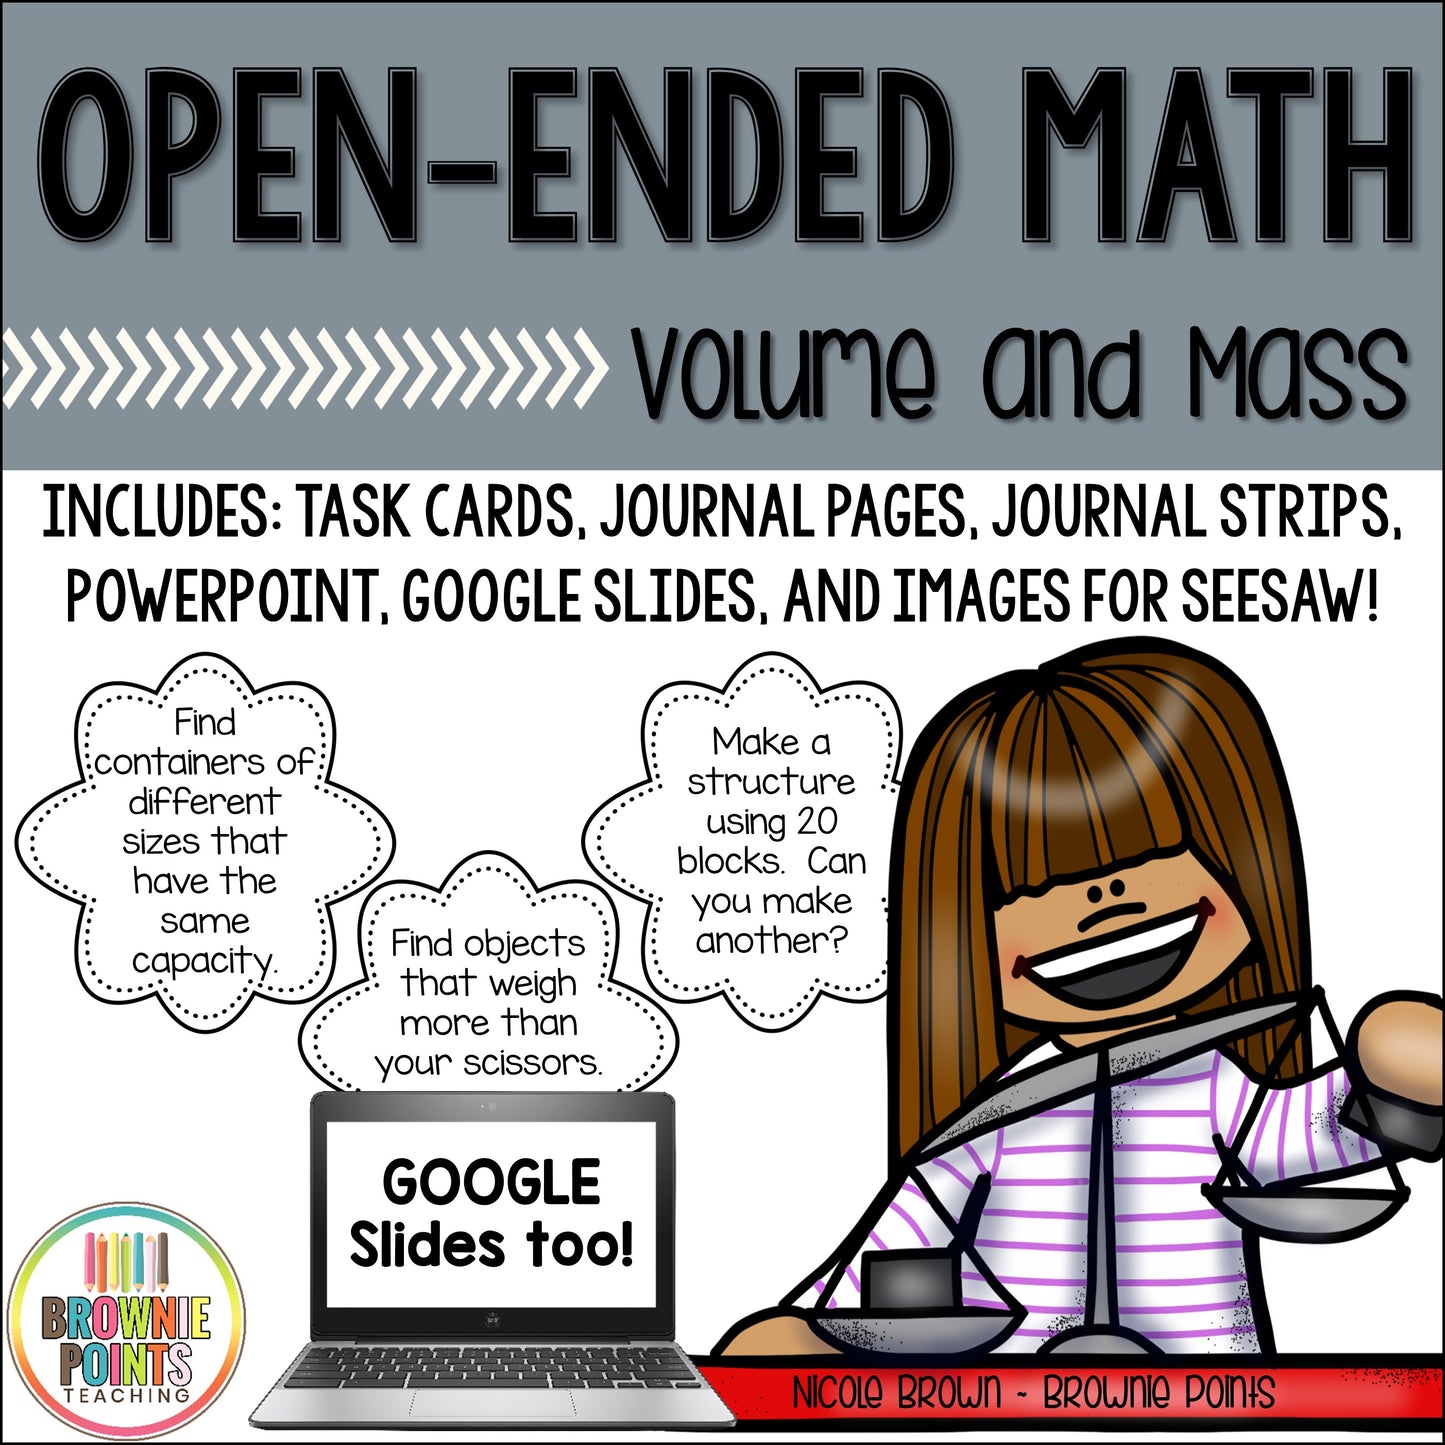 Open-Ended Math Questions - Volume and Mass